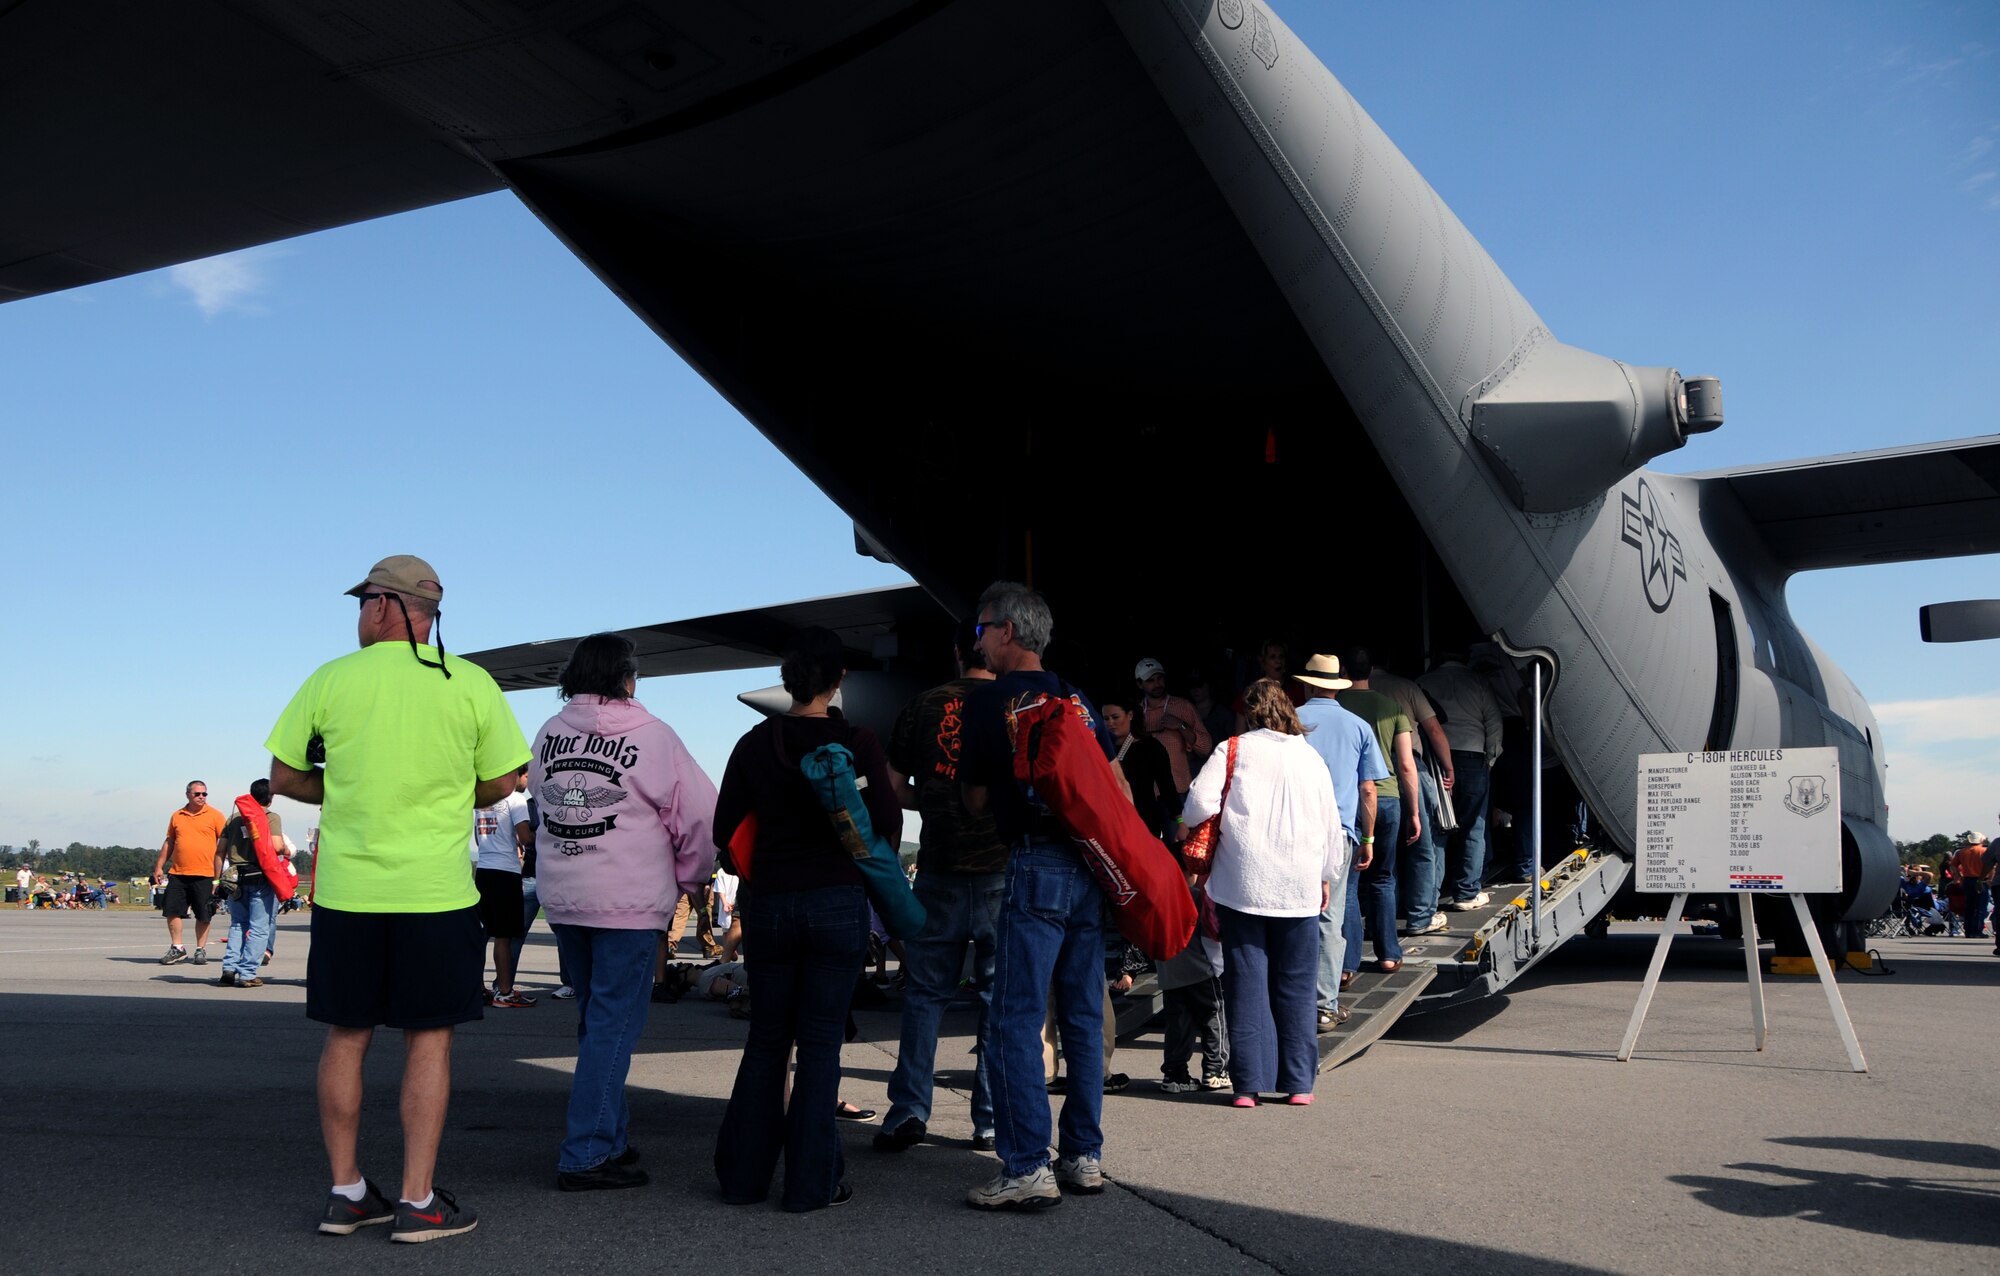 Visitors to the Wing over North Georgia air show line up to tour a U.S. Air Force C-130 Hercules from Dobbins Air Reserve Base, Ga. at Rome, Ga., Oct. 18, 2014. The 700th Airlift Squadron brought a U.S. Air Force C-130 Hercules to the WONG air show as a static display. (U.S. Air Force photo by Senior Airman Daniel Phelps/Released)